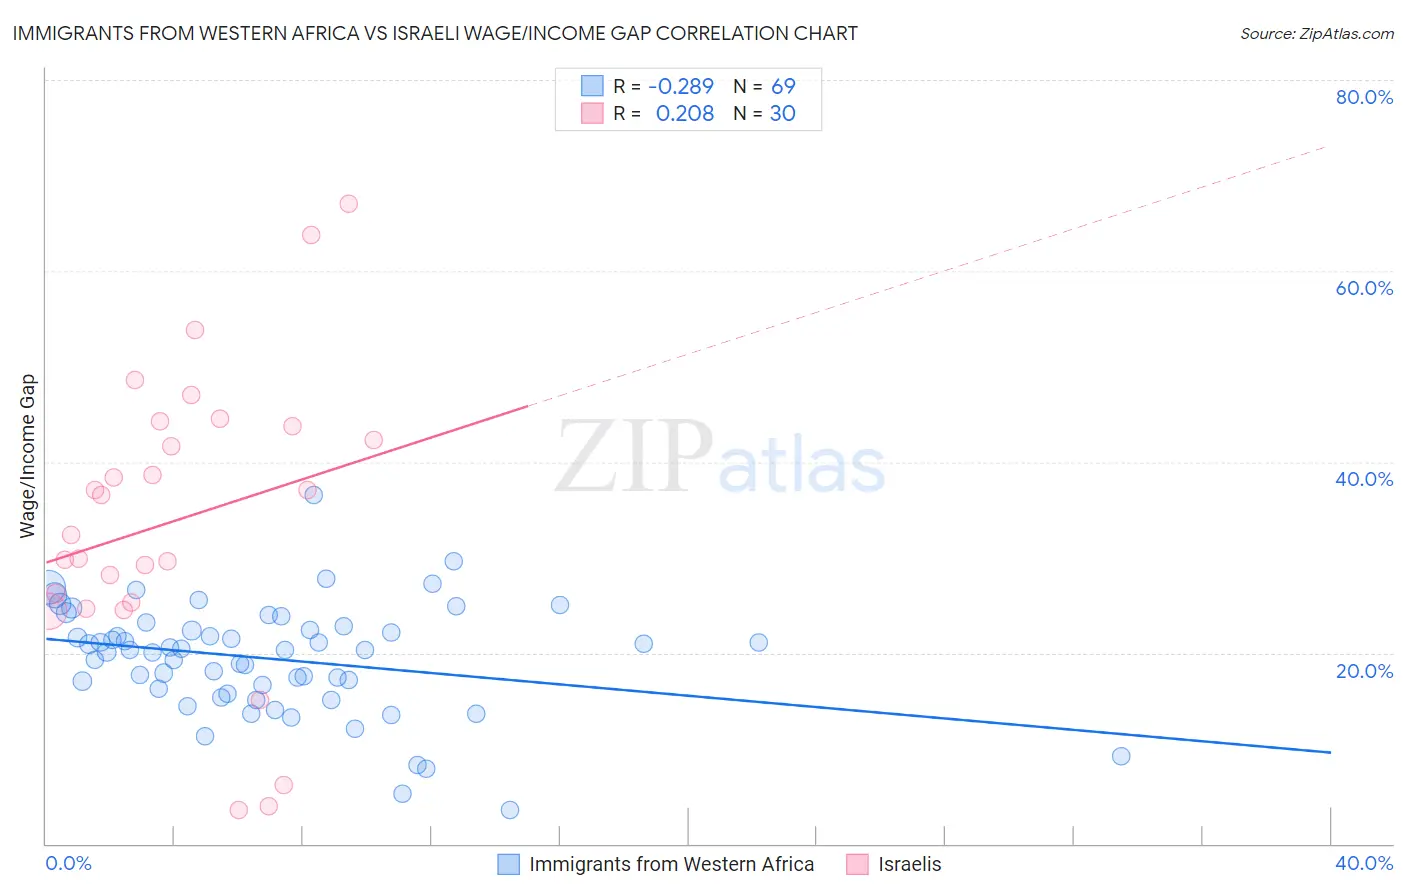 Immigrants from Western Africa vs Israeli Wage/Income Gap